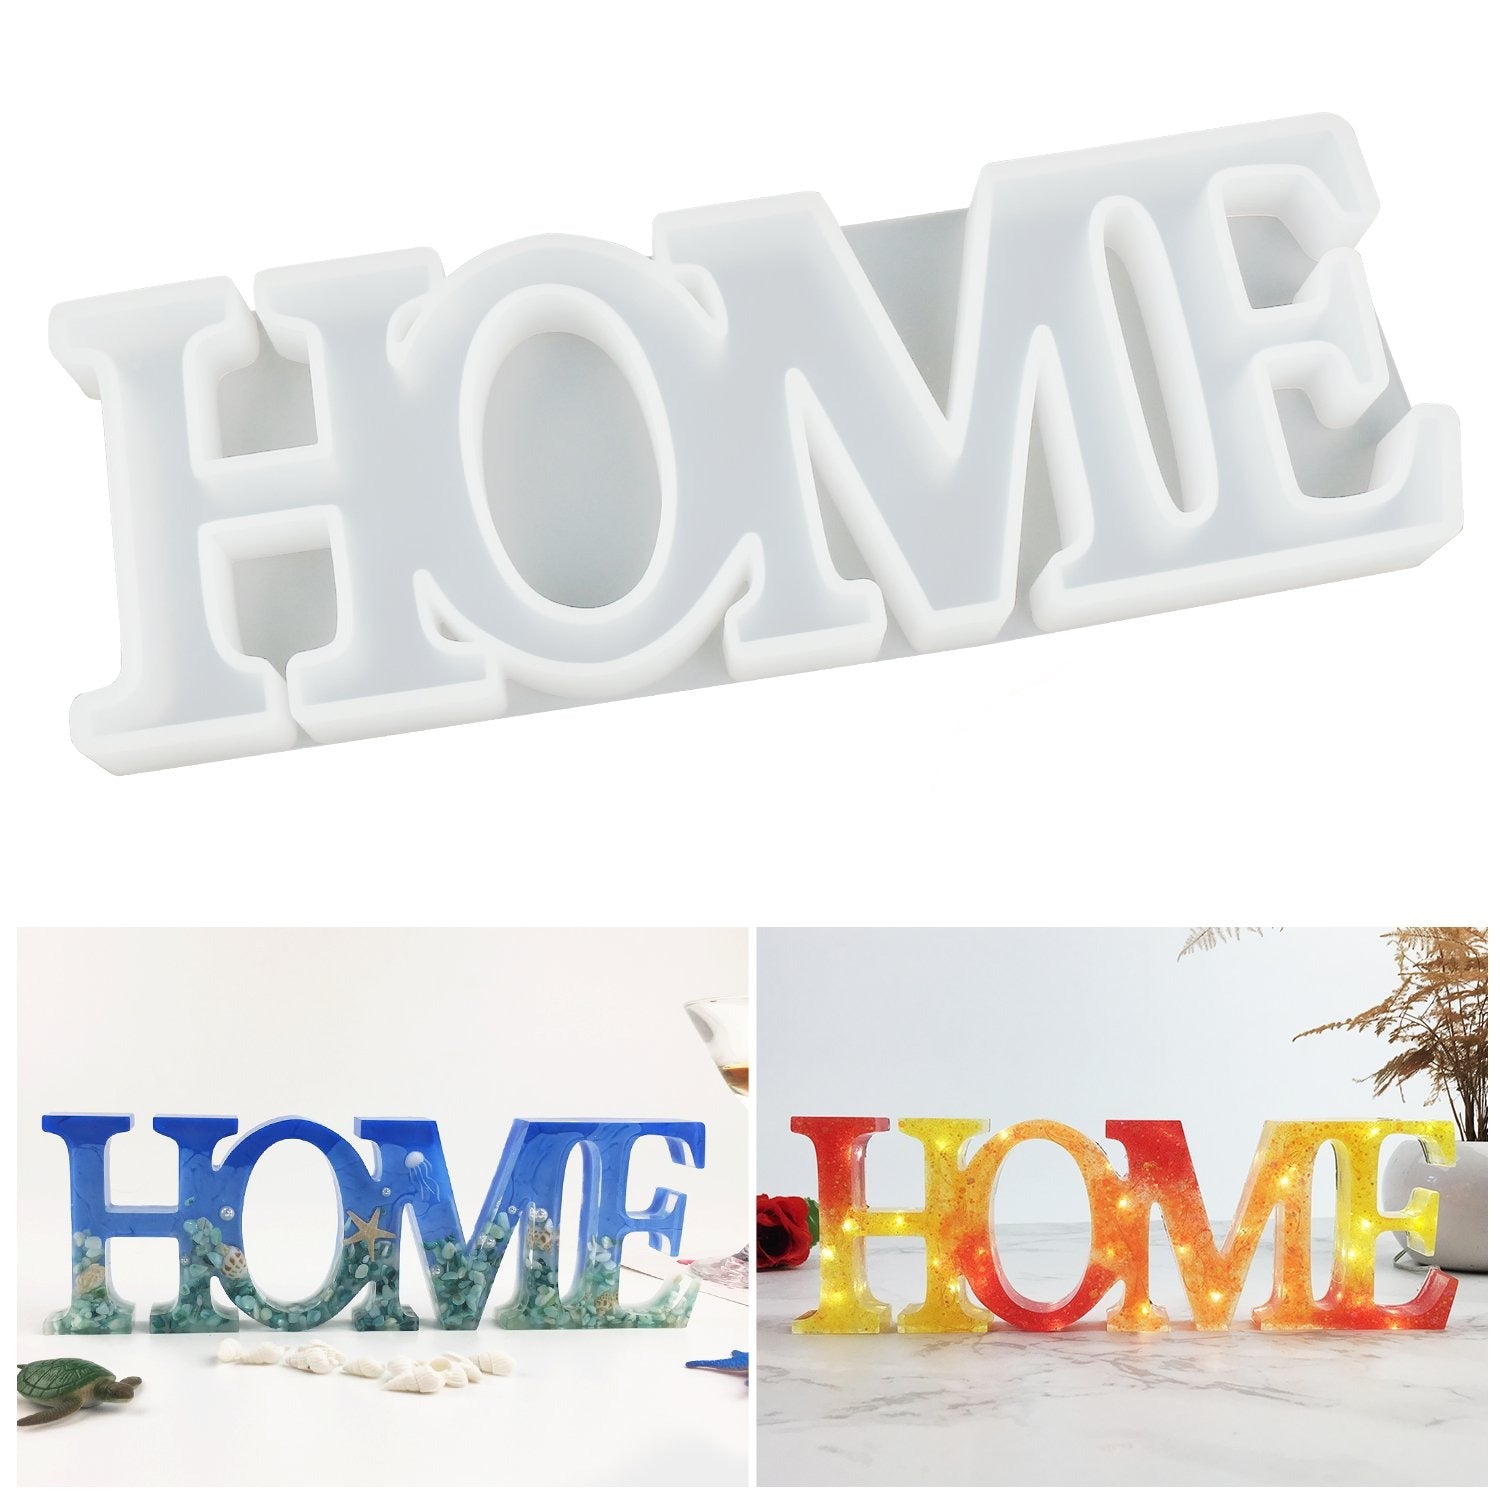 HOME Resin Word Sign Mold